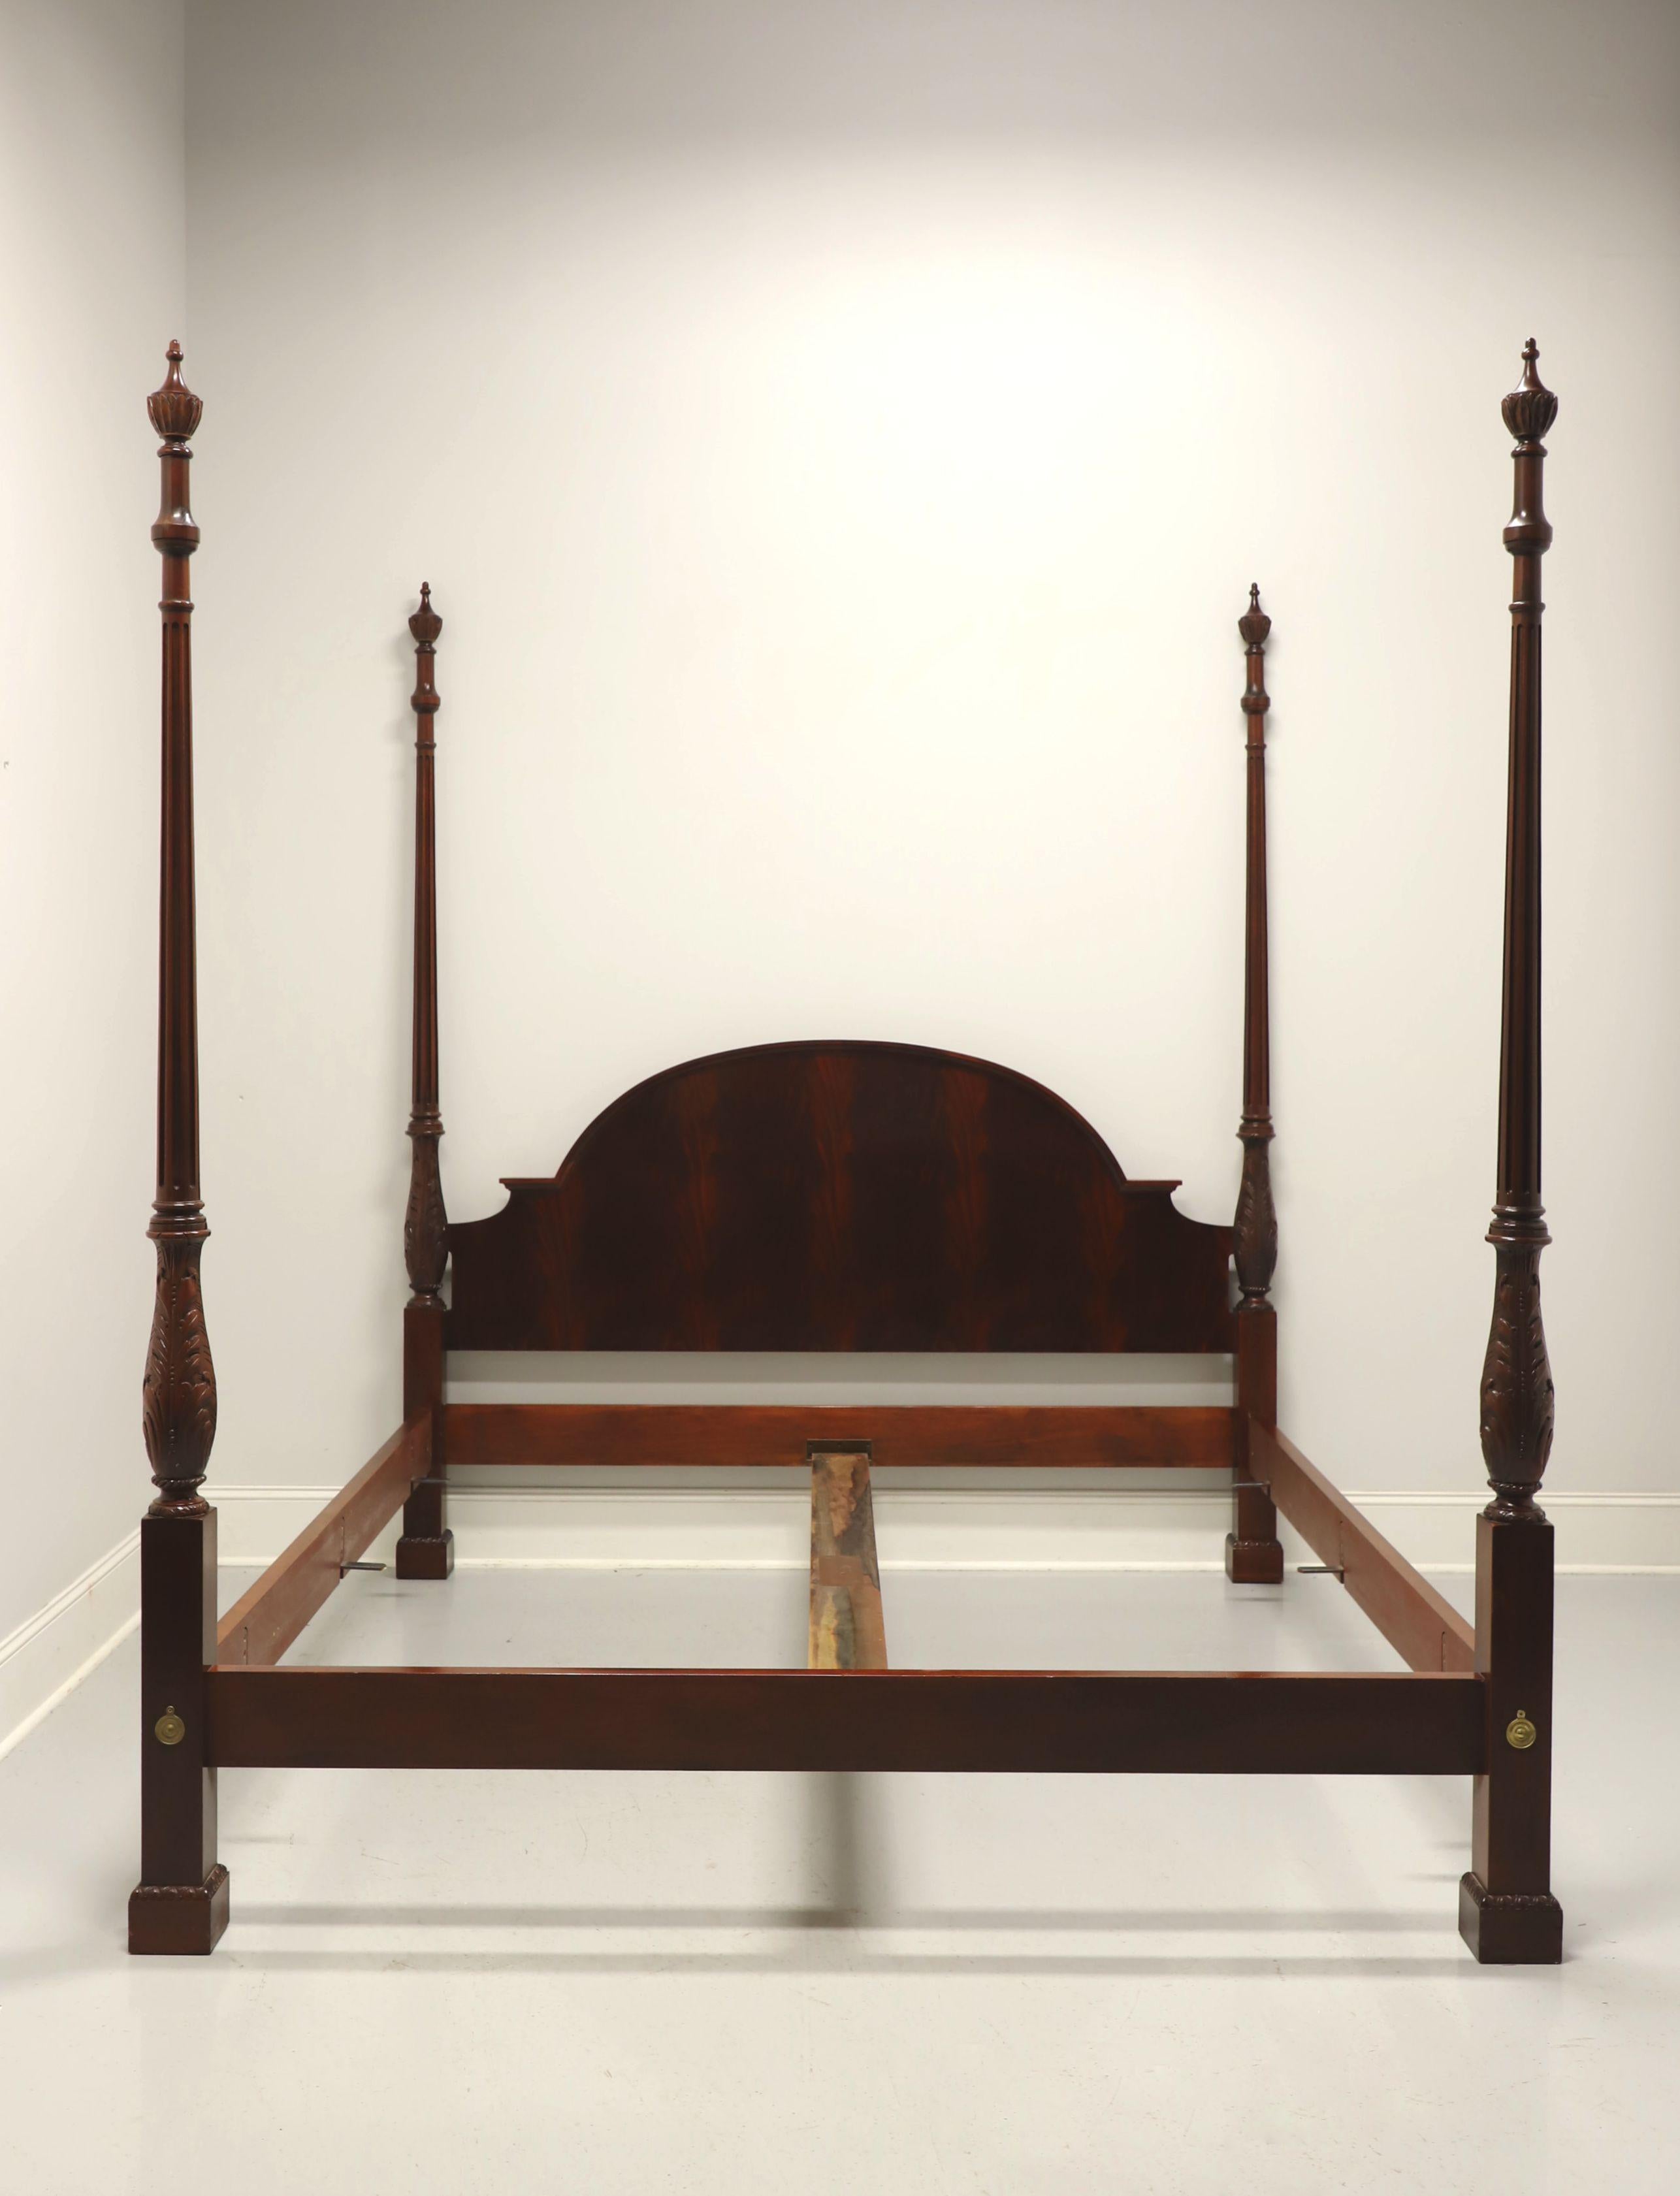 A Georgian style California king size poster bed by Baker Furniture. Flame mahogany with arched headboard, four carved posts with decorative finials, brass hardware, bolt held side rails with wood bracers, center wood rail attaches to metal supports